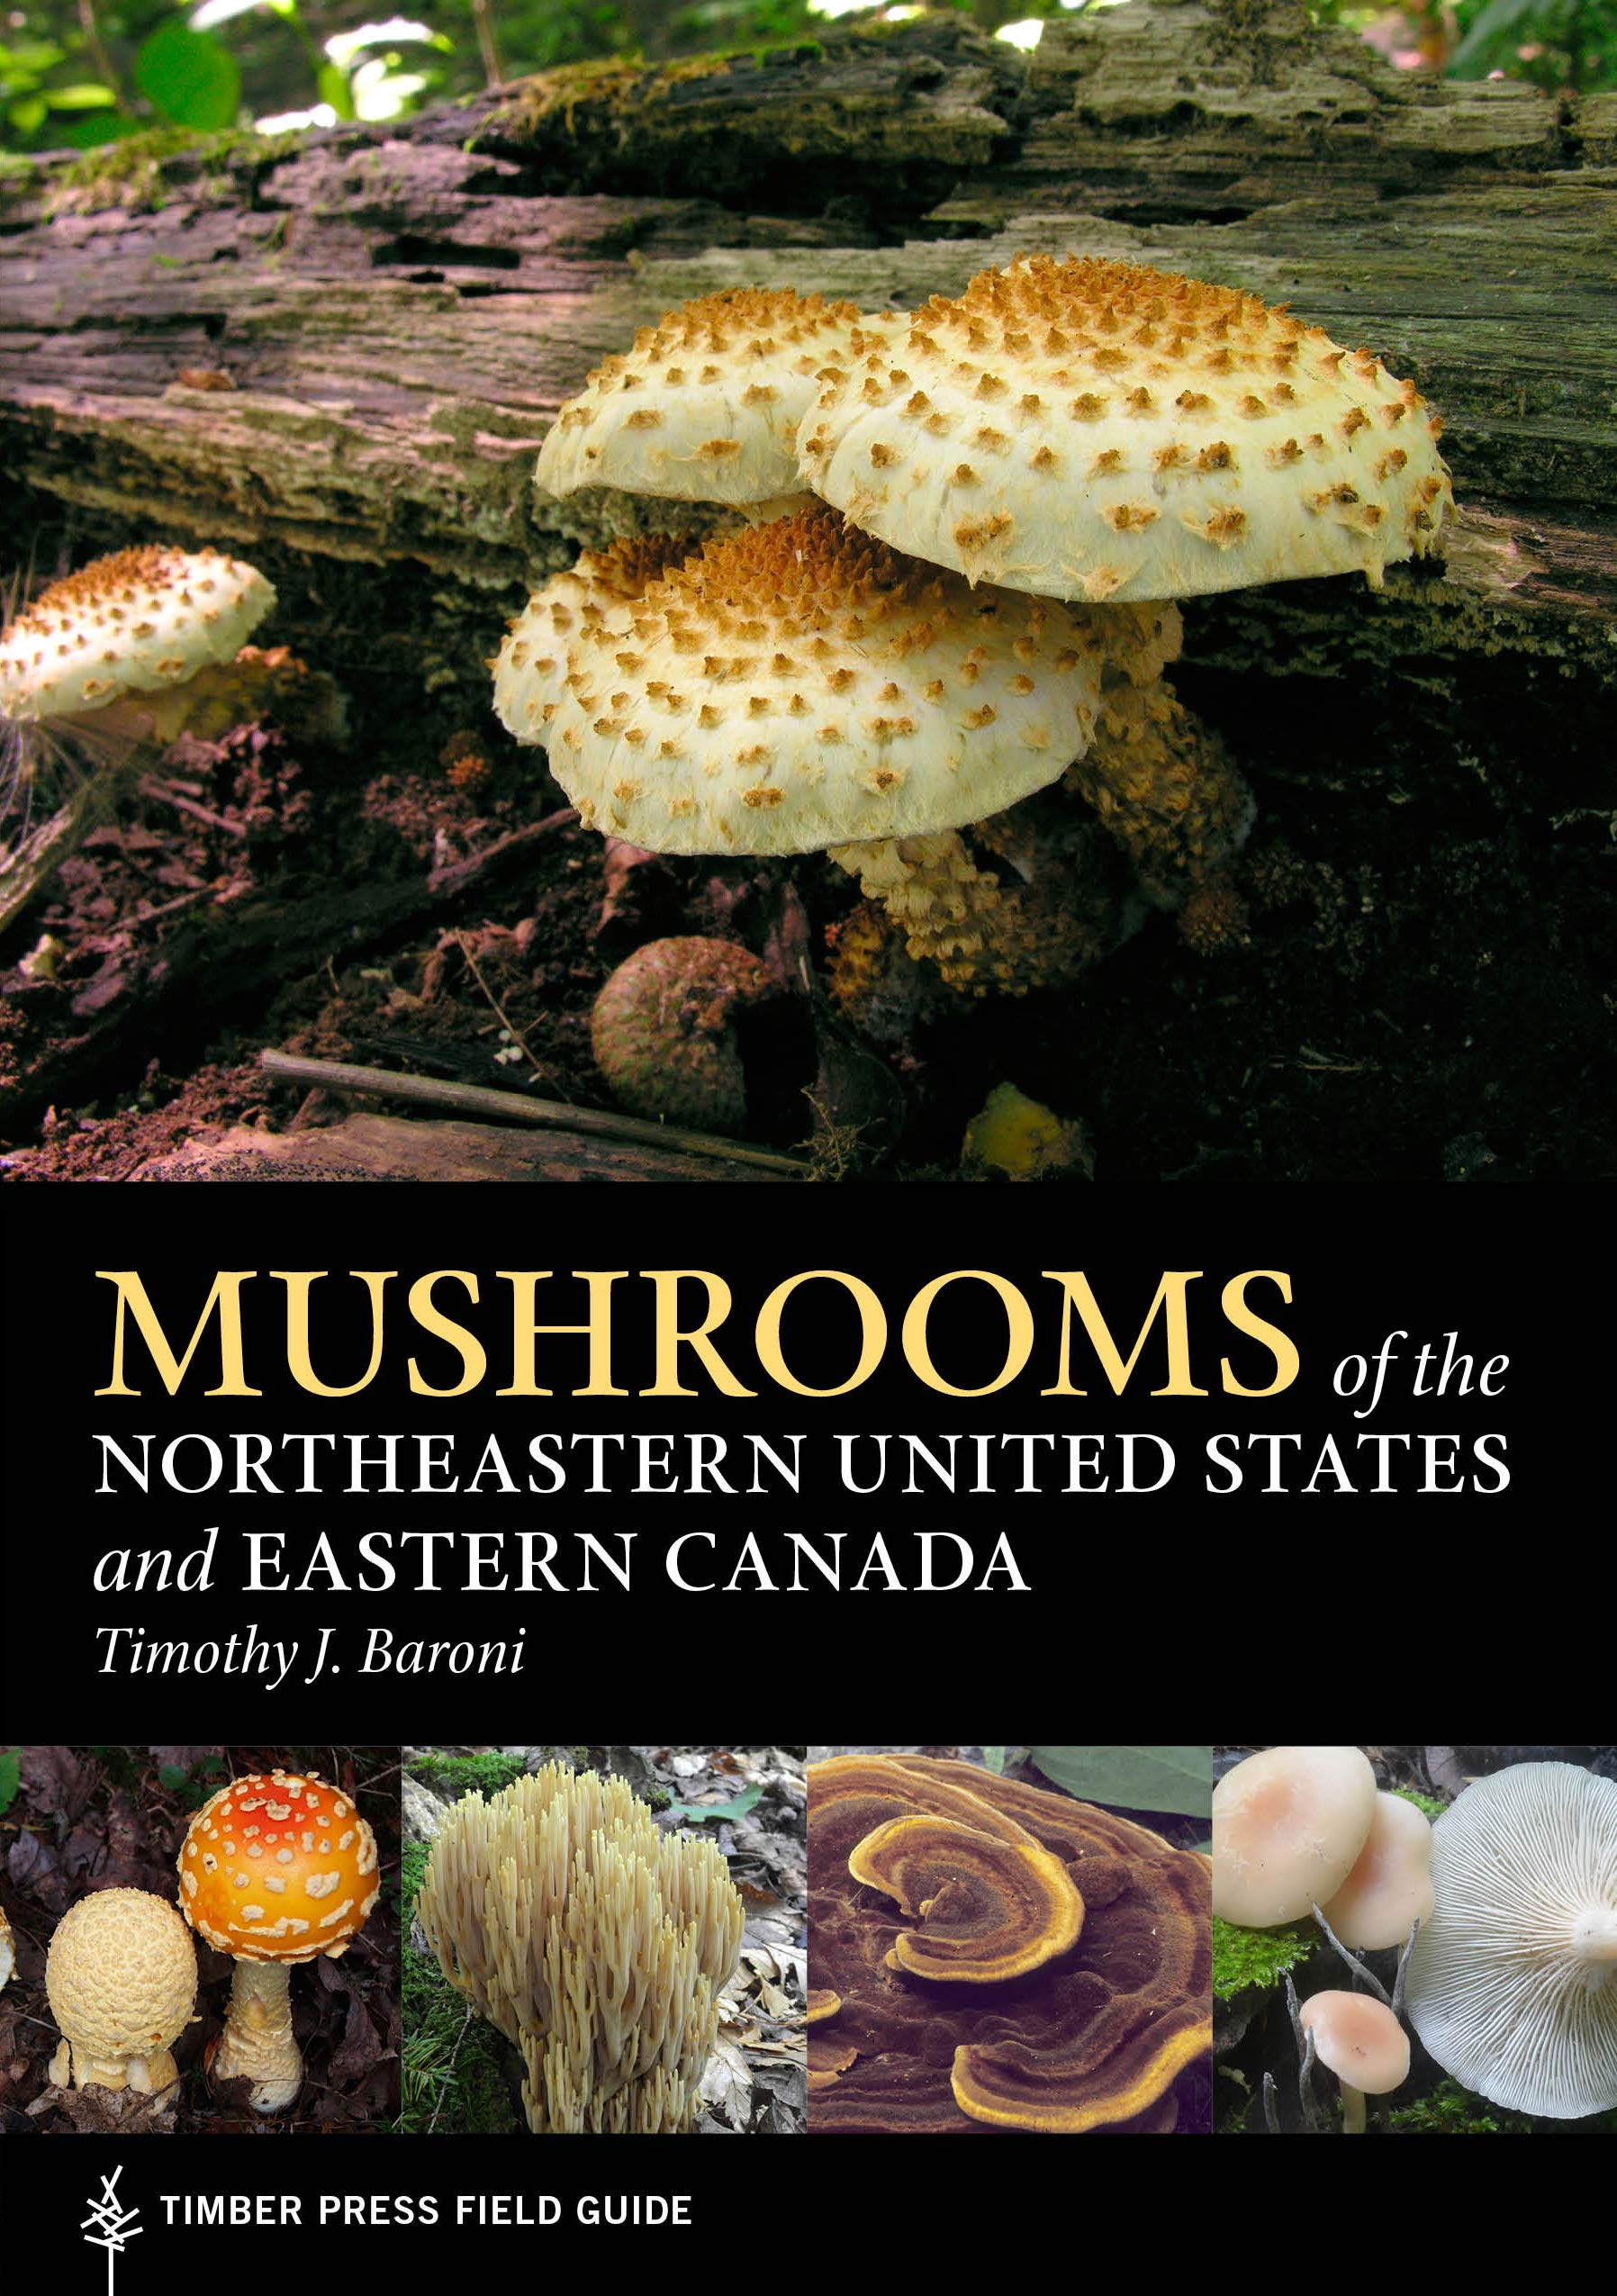 Mushrooms of the Northeastern United States and Eastern Canada (A Timber Press Field Guide)